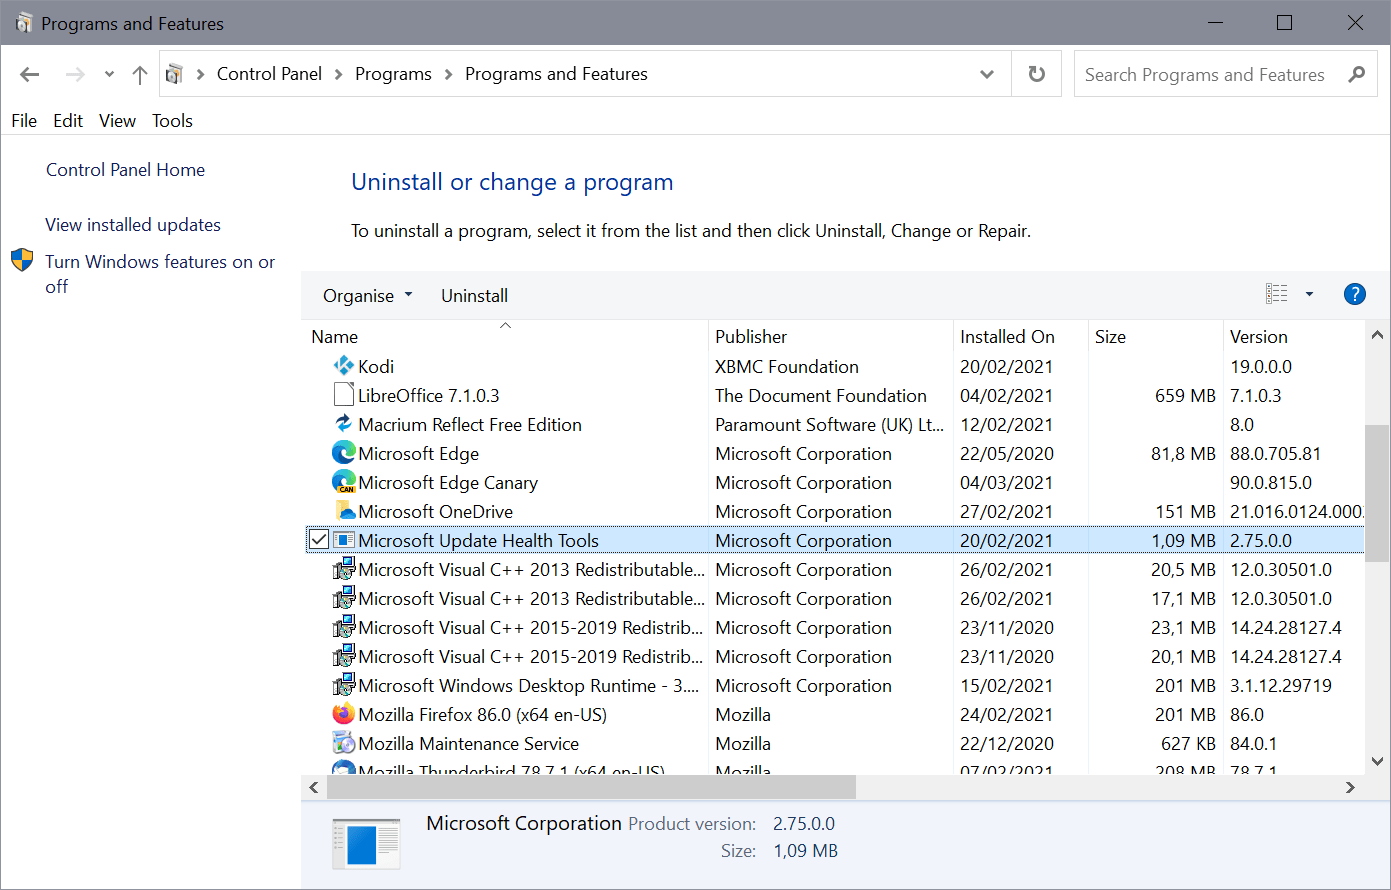 Is the Windows 10 app Microsoft Update Health Tools legitimate? microsoft-update-health-tools-control-panel.png